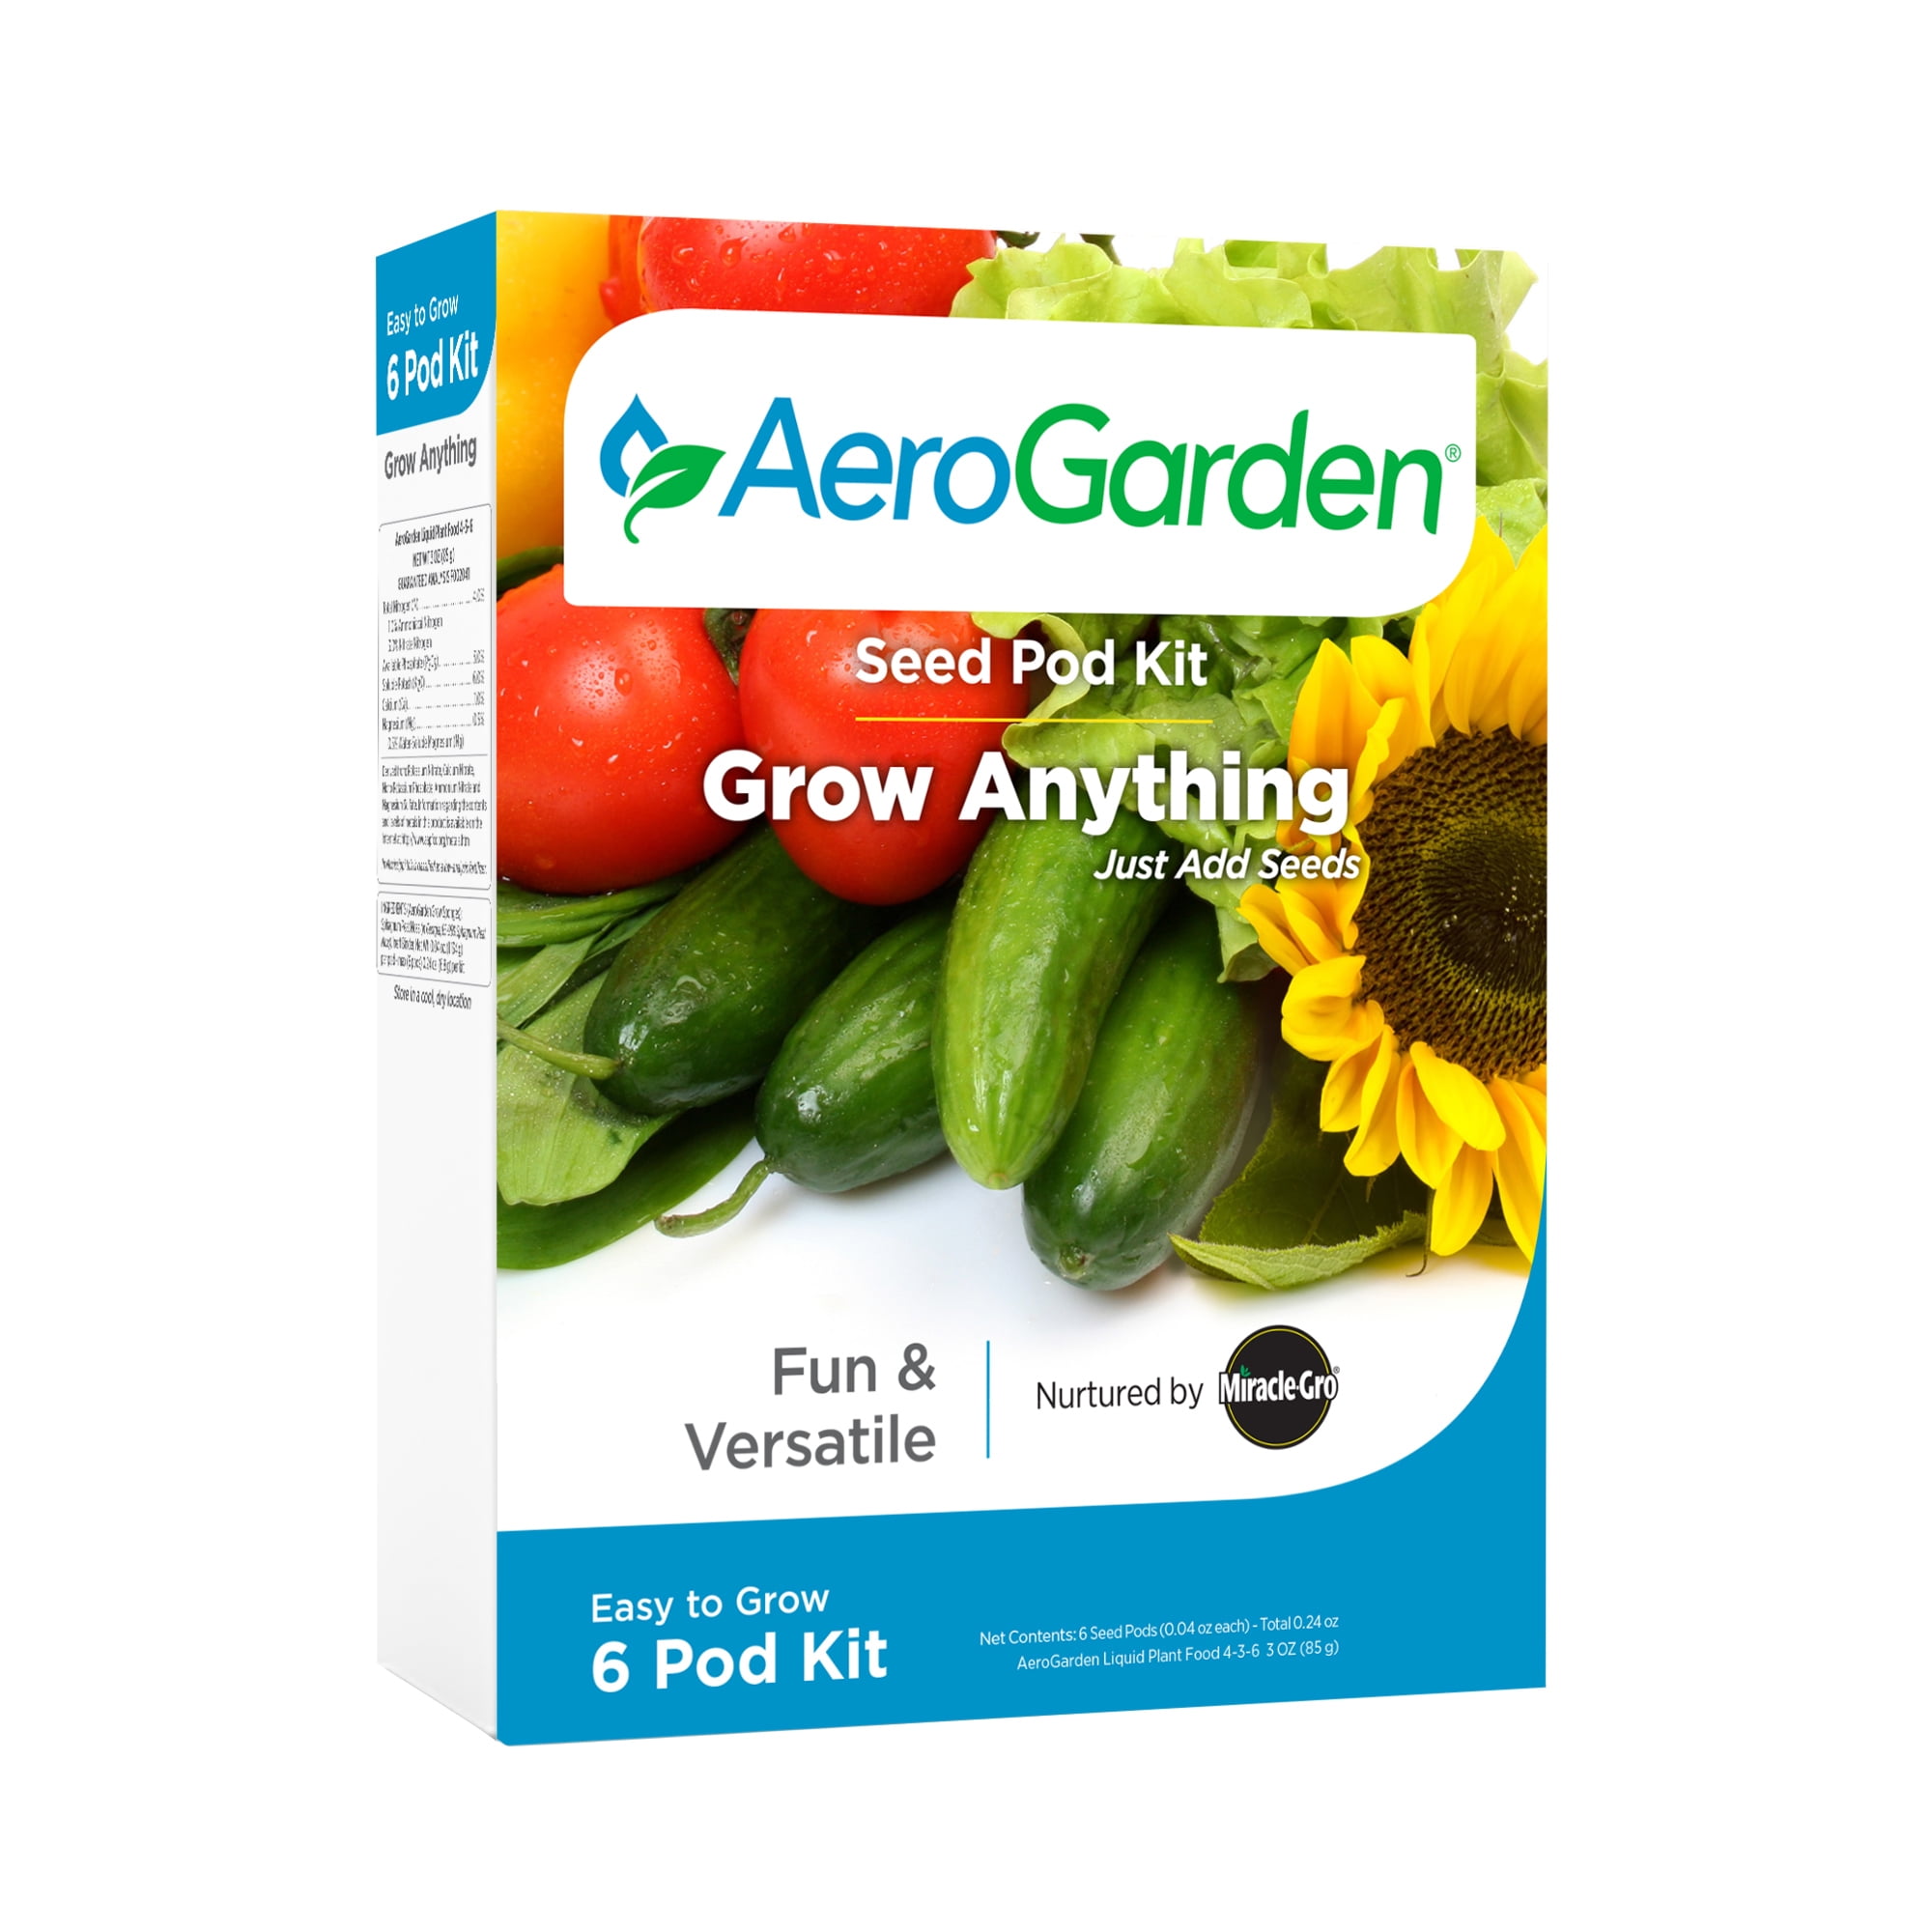 AeroGarden Grow Anything Seed Pod Kit New/nuevo 2020 for sale online 